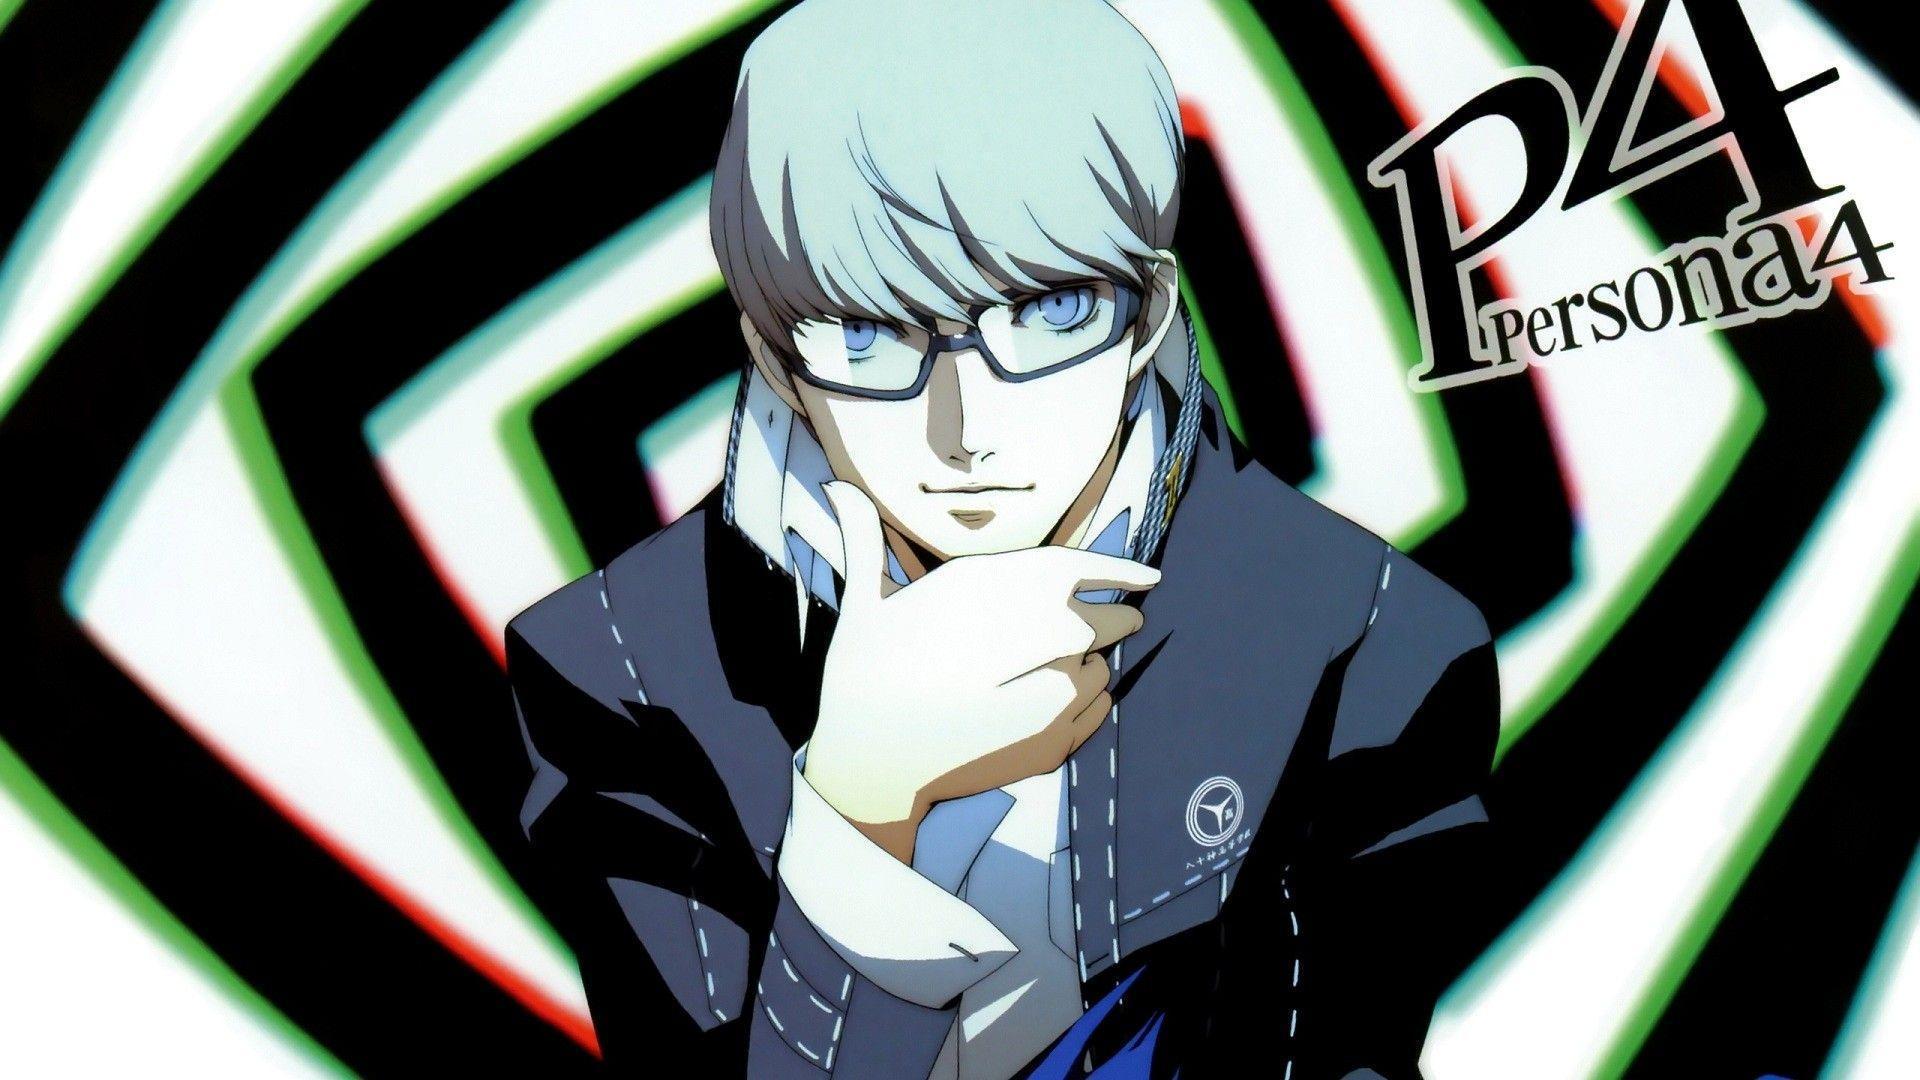 Download Persona 4 Wallpapers 1920x1080